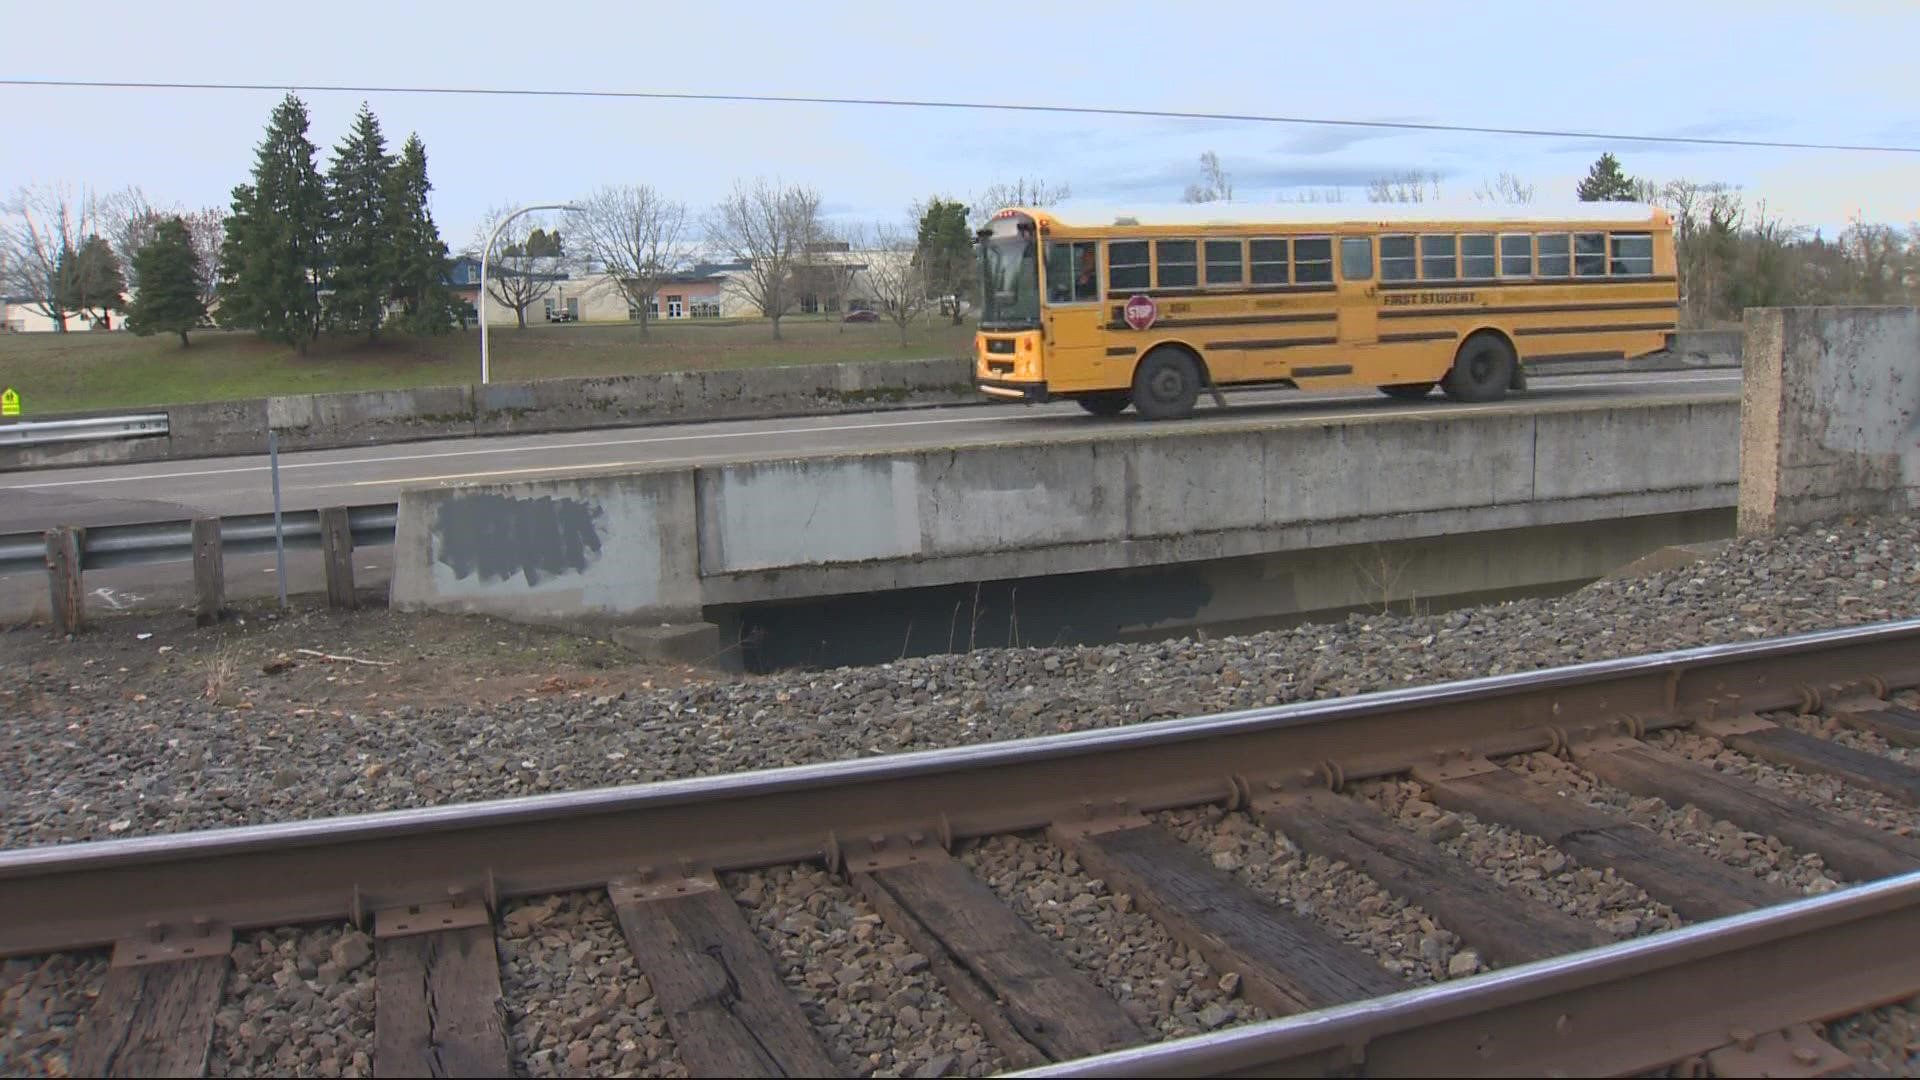 Woodburn police said a 17-year-old junior was walking on the railroad tracks when he was hit from behind by a northbound train.